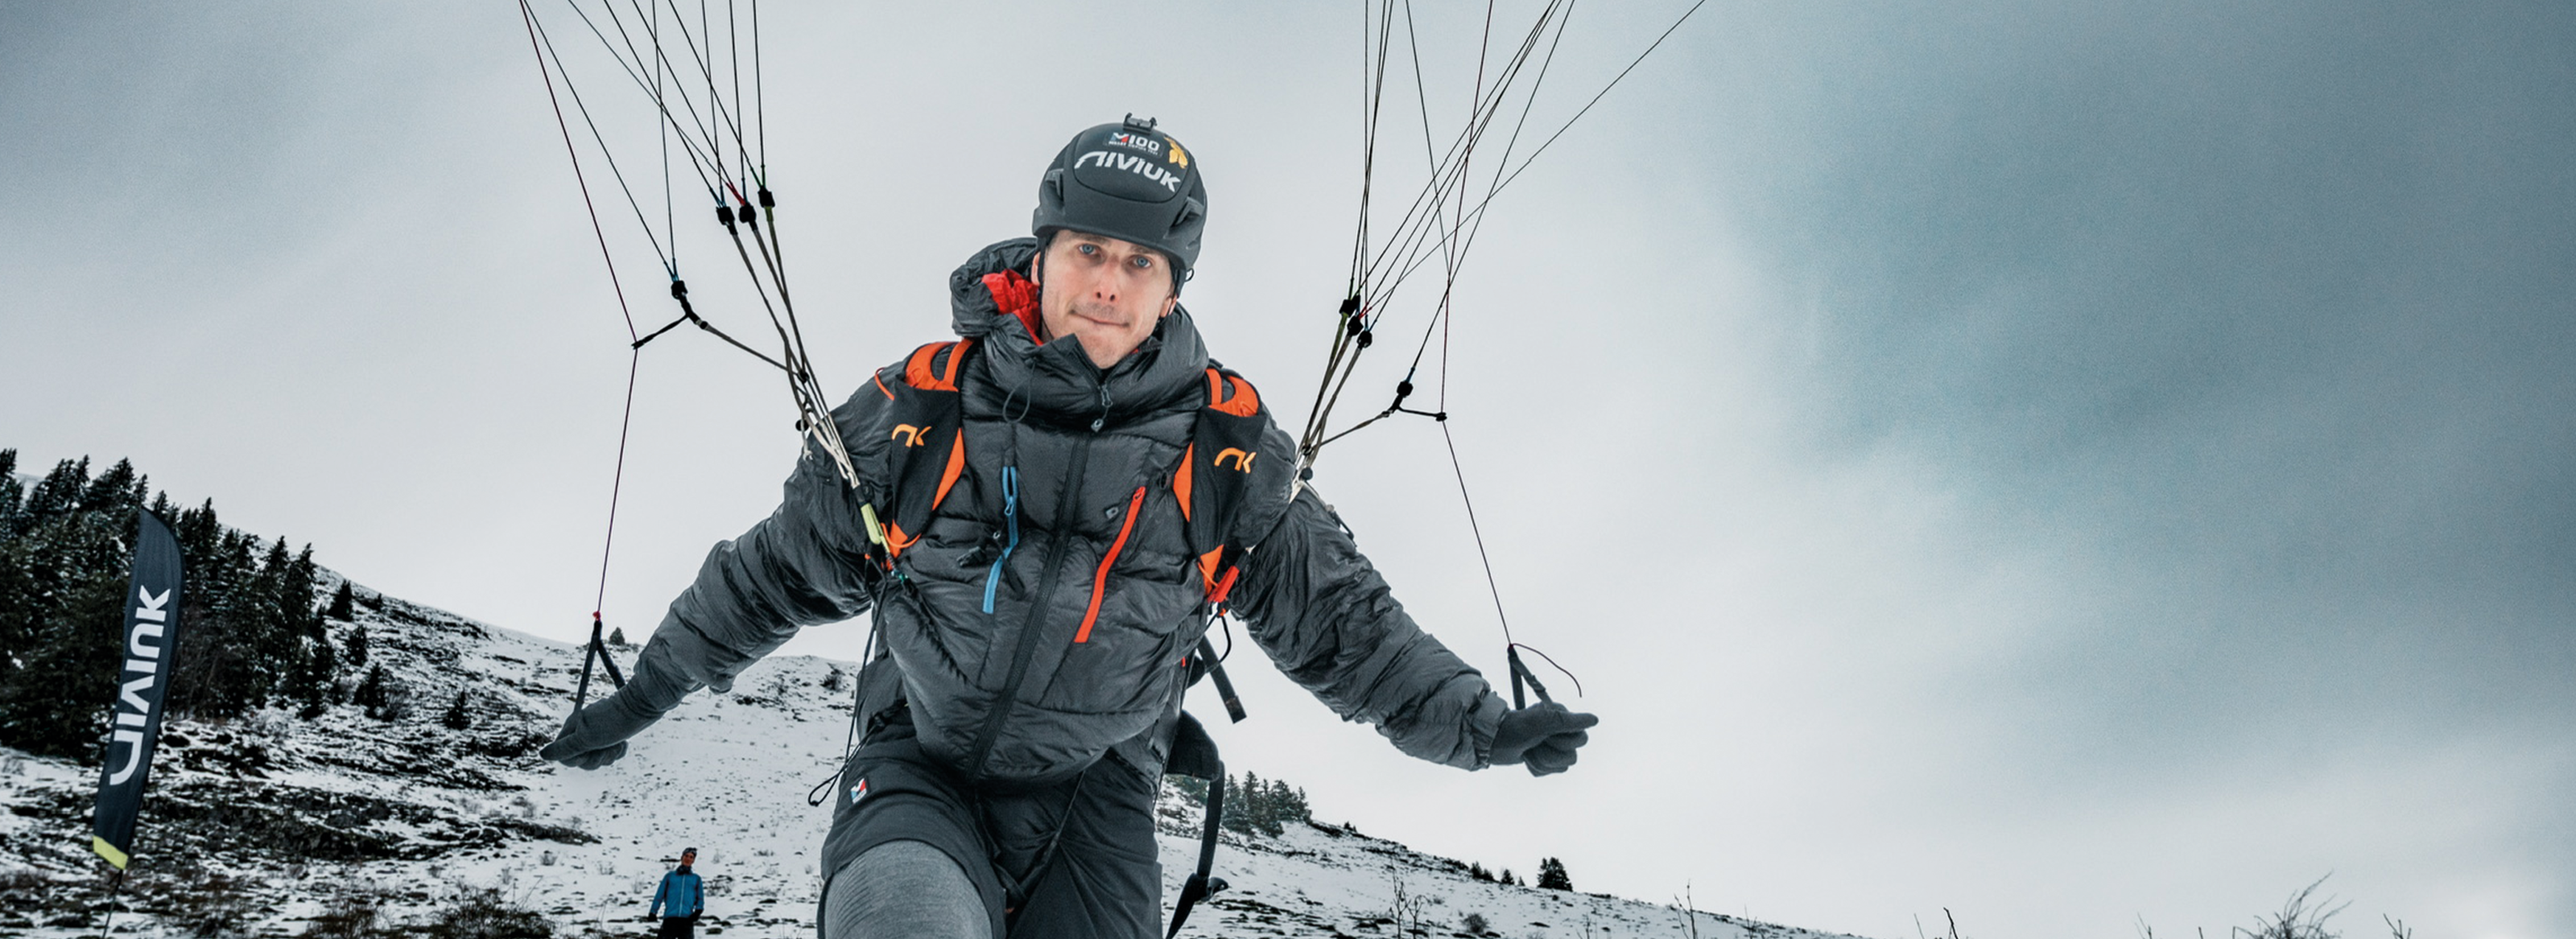 Pilot Tanguy Renaud-Goud sets a Hike & Fly world record with the Kode P